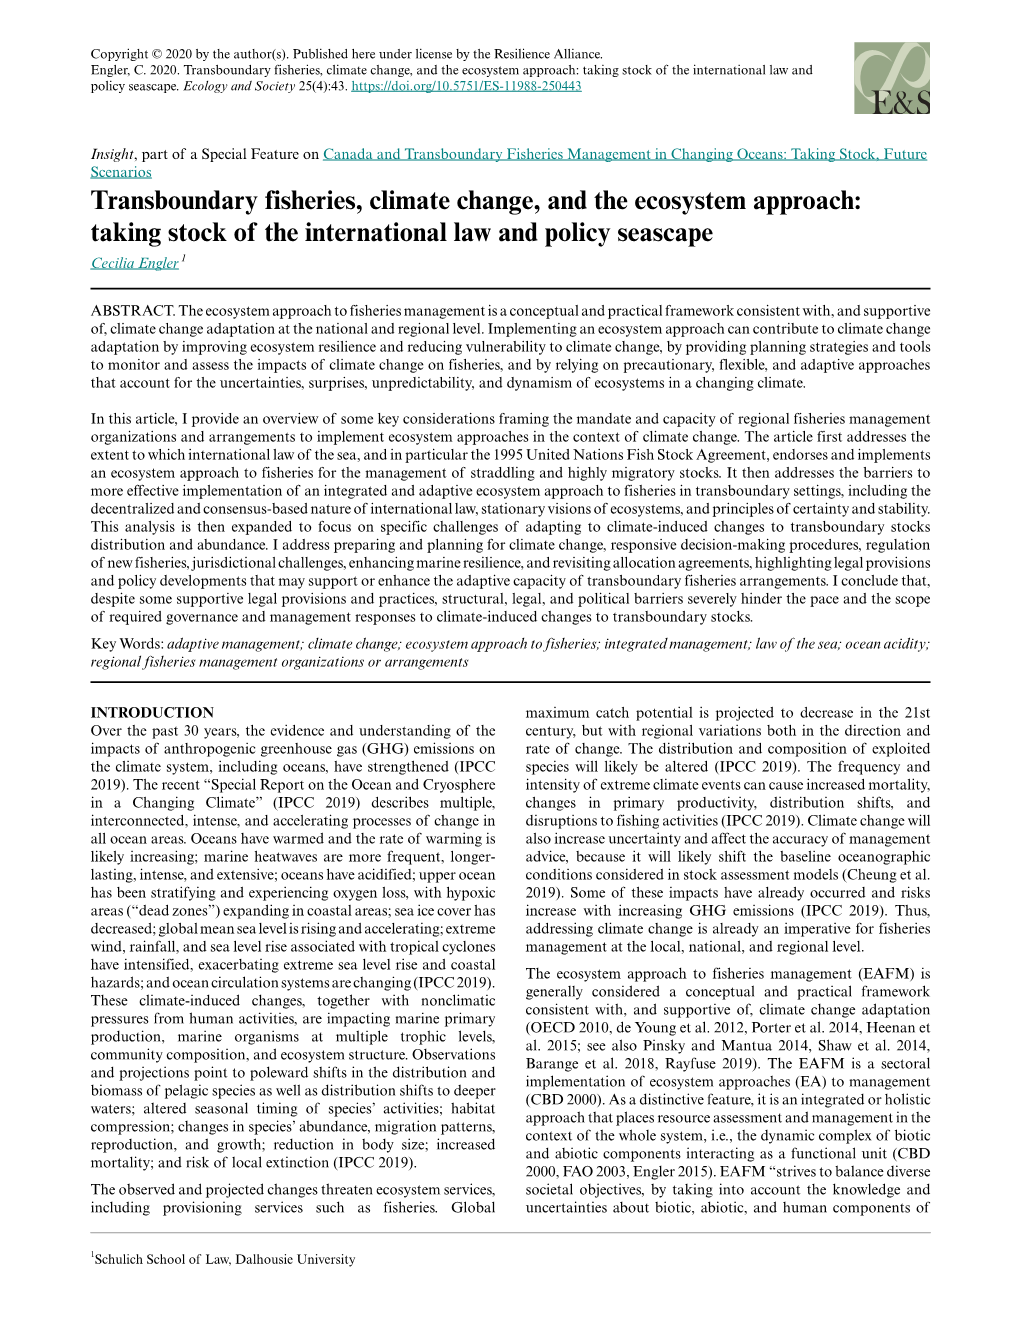 Transboundary Fisheries, Climate Change, and the Ecosystem Approach: Taking Stock of the International Law and Policy Seascape